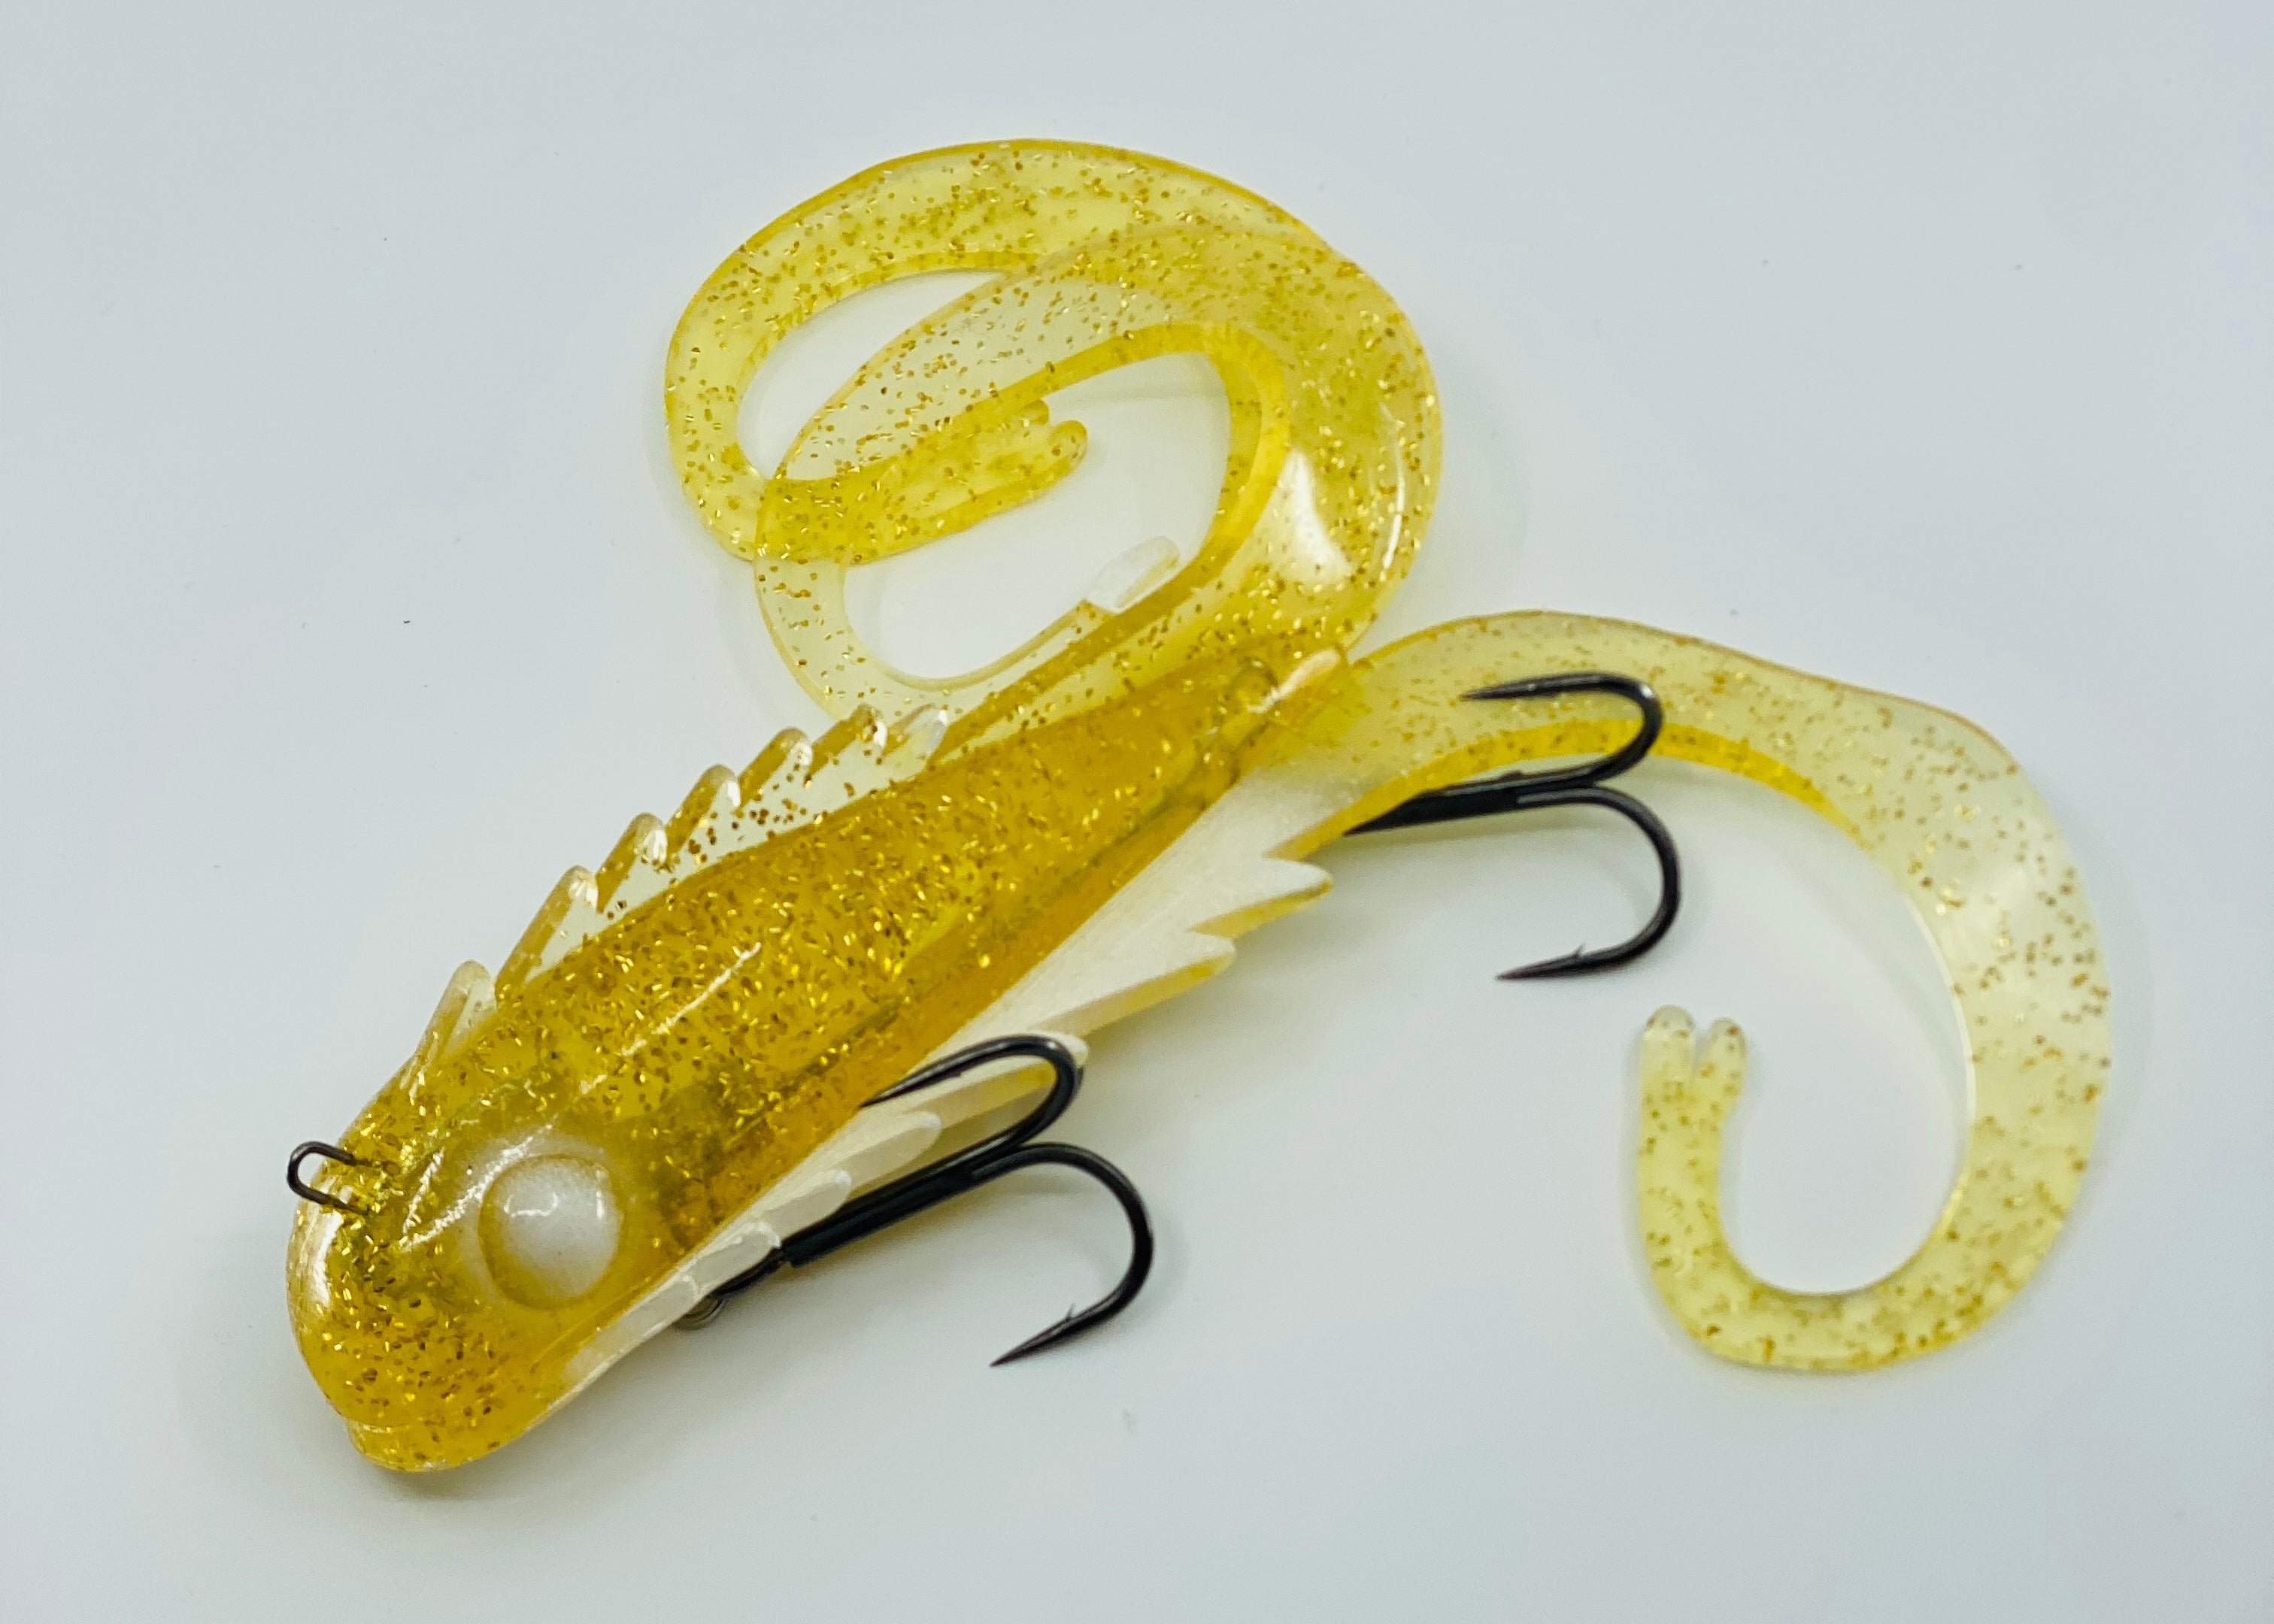 Chaos Tackle Mid Medussa – Tall Tales Bait & Tackle